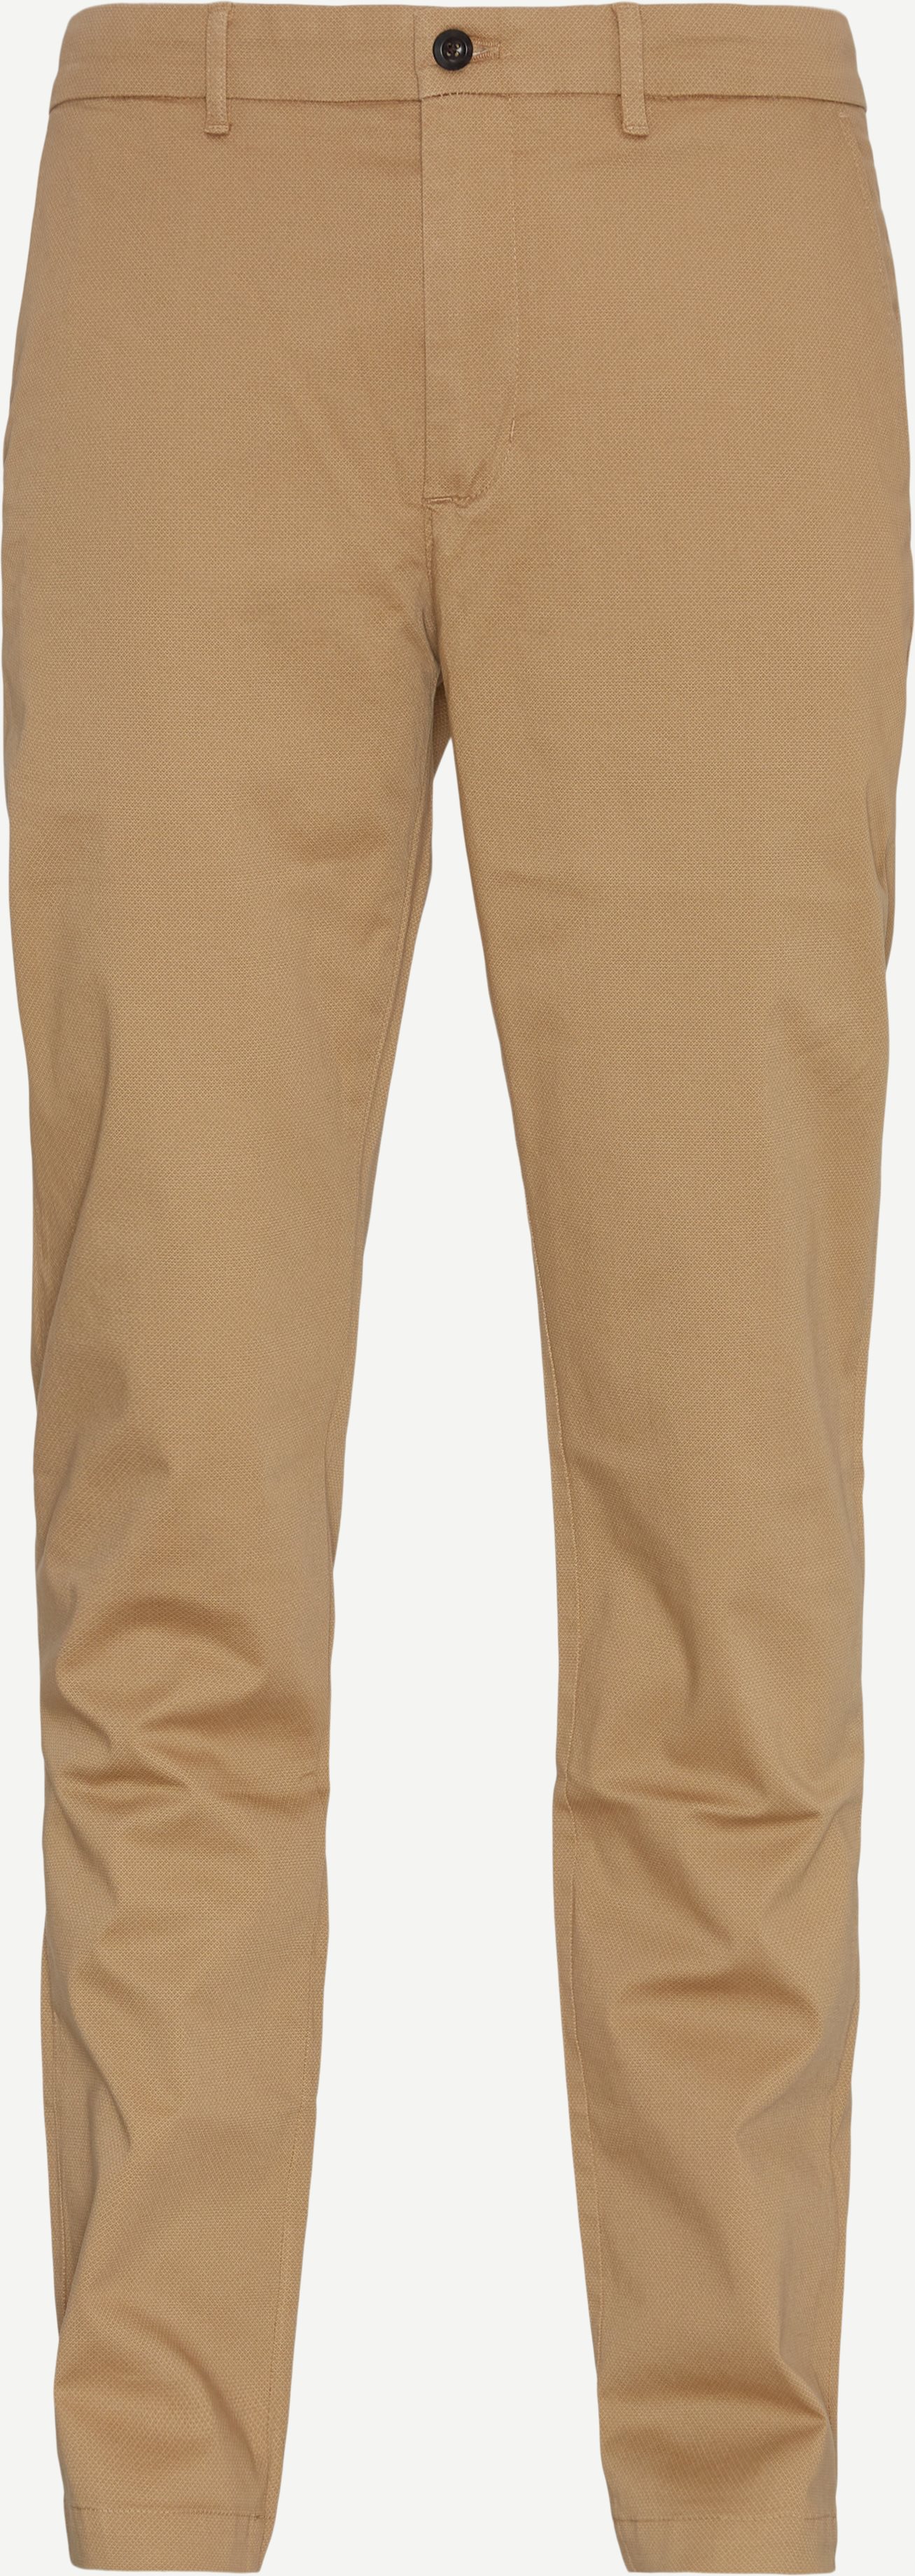 Tommy Hilfiger Trousers 33938 CHINO DENTON PRINTED STRUCTURE Sand